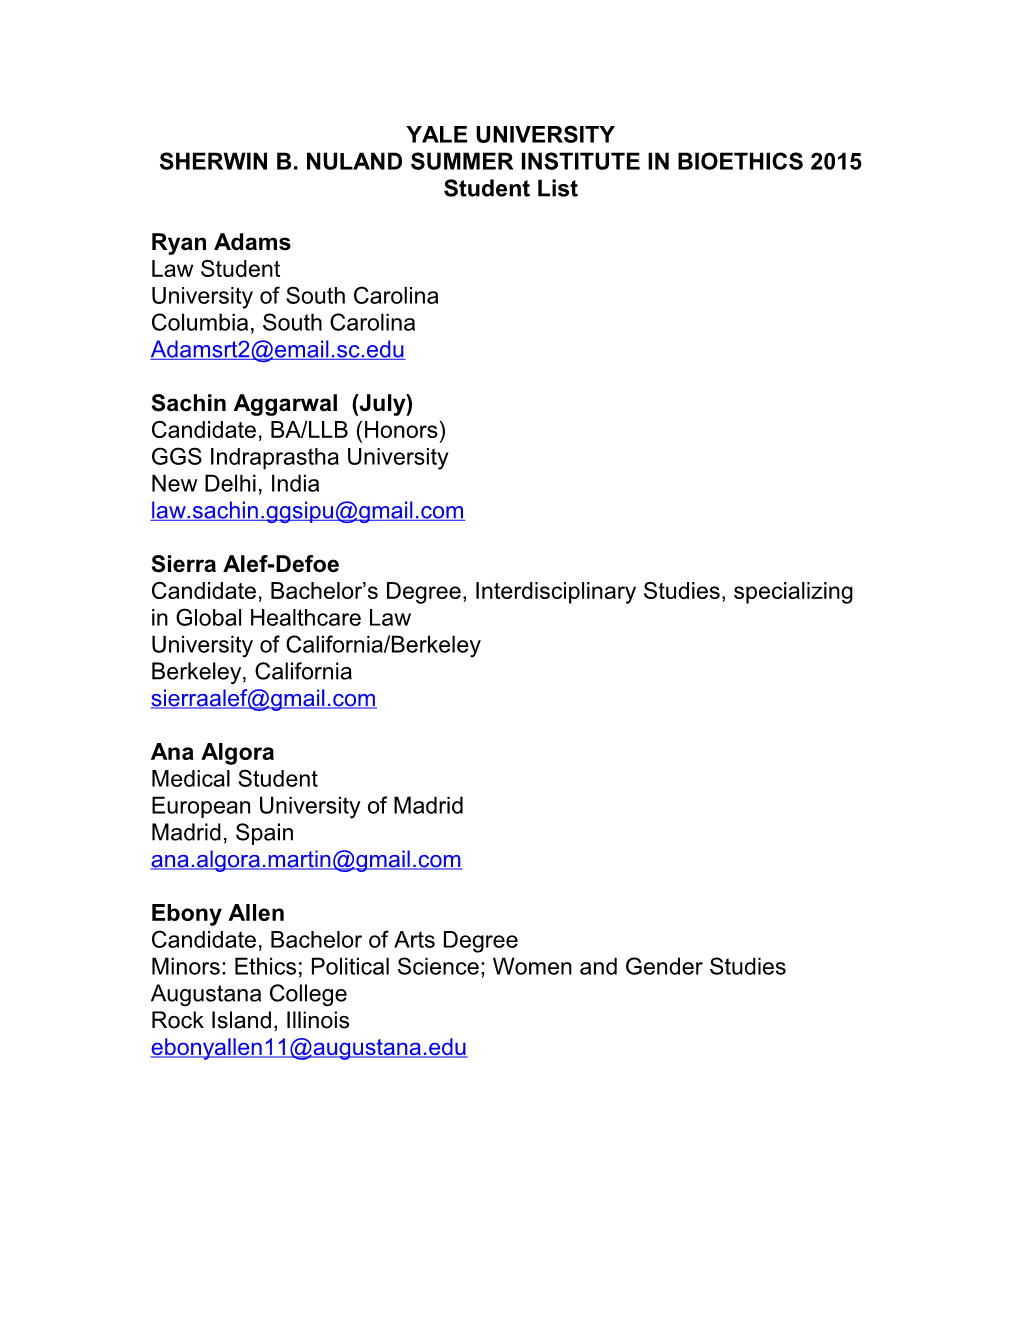 SHERWIN B. NULAND SUMMER INSTITUTE in BIOETHICS 2015 Student List